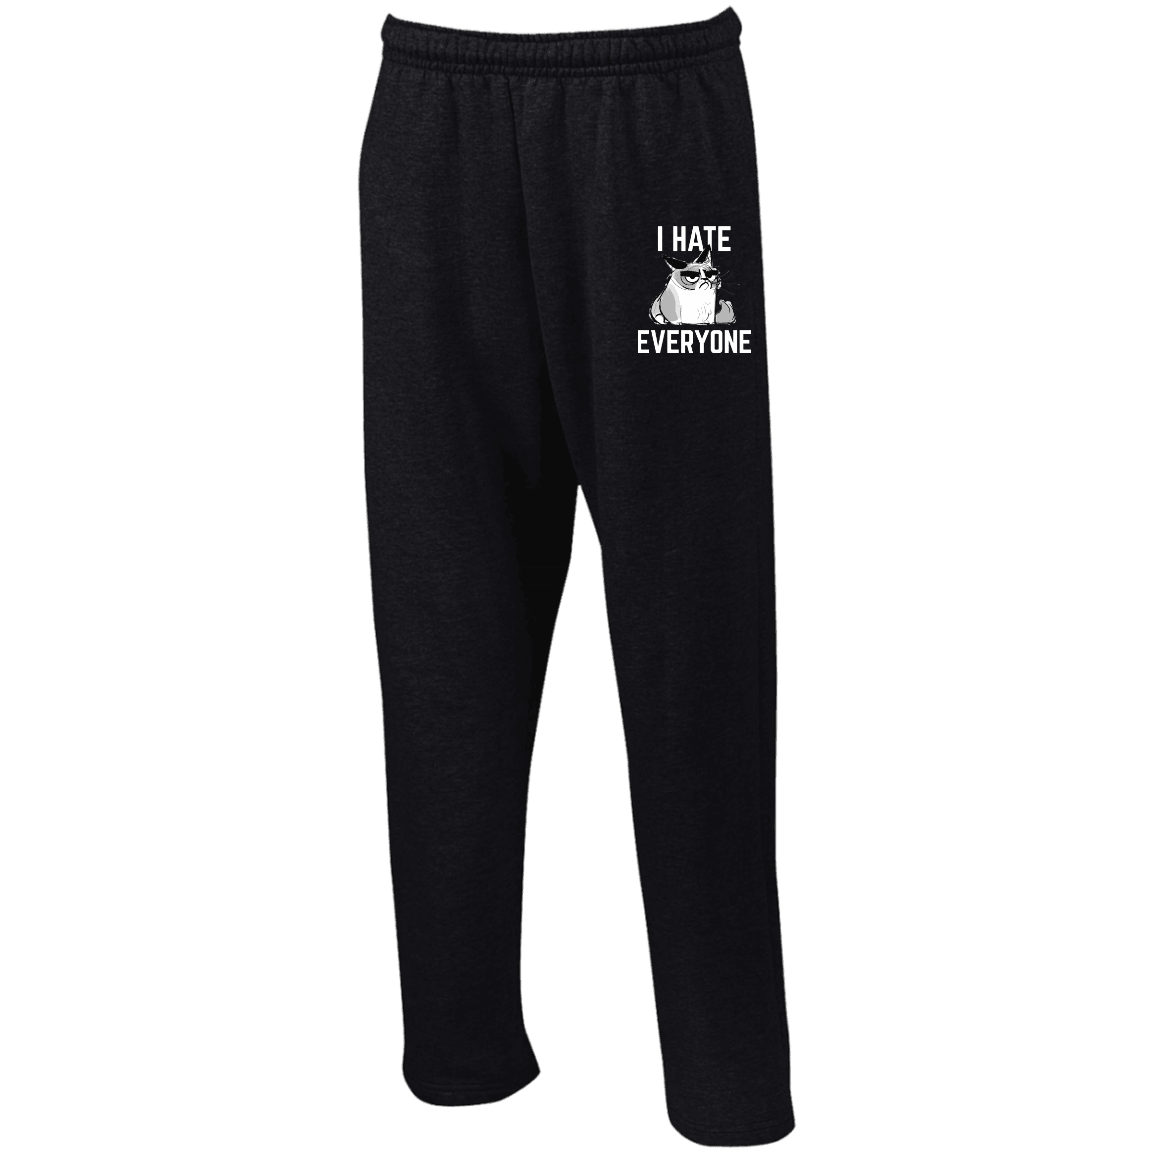 Designs by MyUtopia Shout Out:I Hate Everyone Inspired by Grumpy Cat Embroidered Open Bottom Sweatpants with Pockets,Black / S,Pants